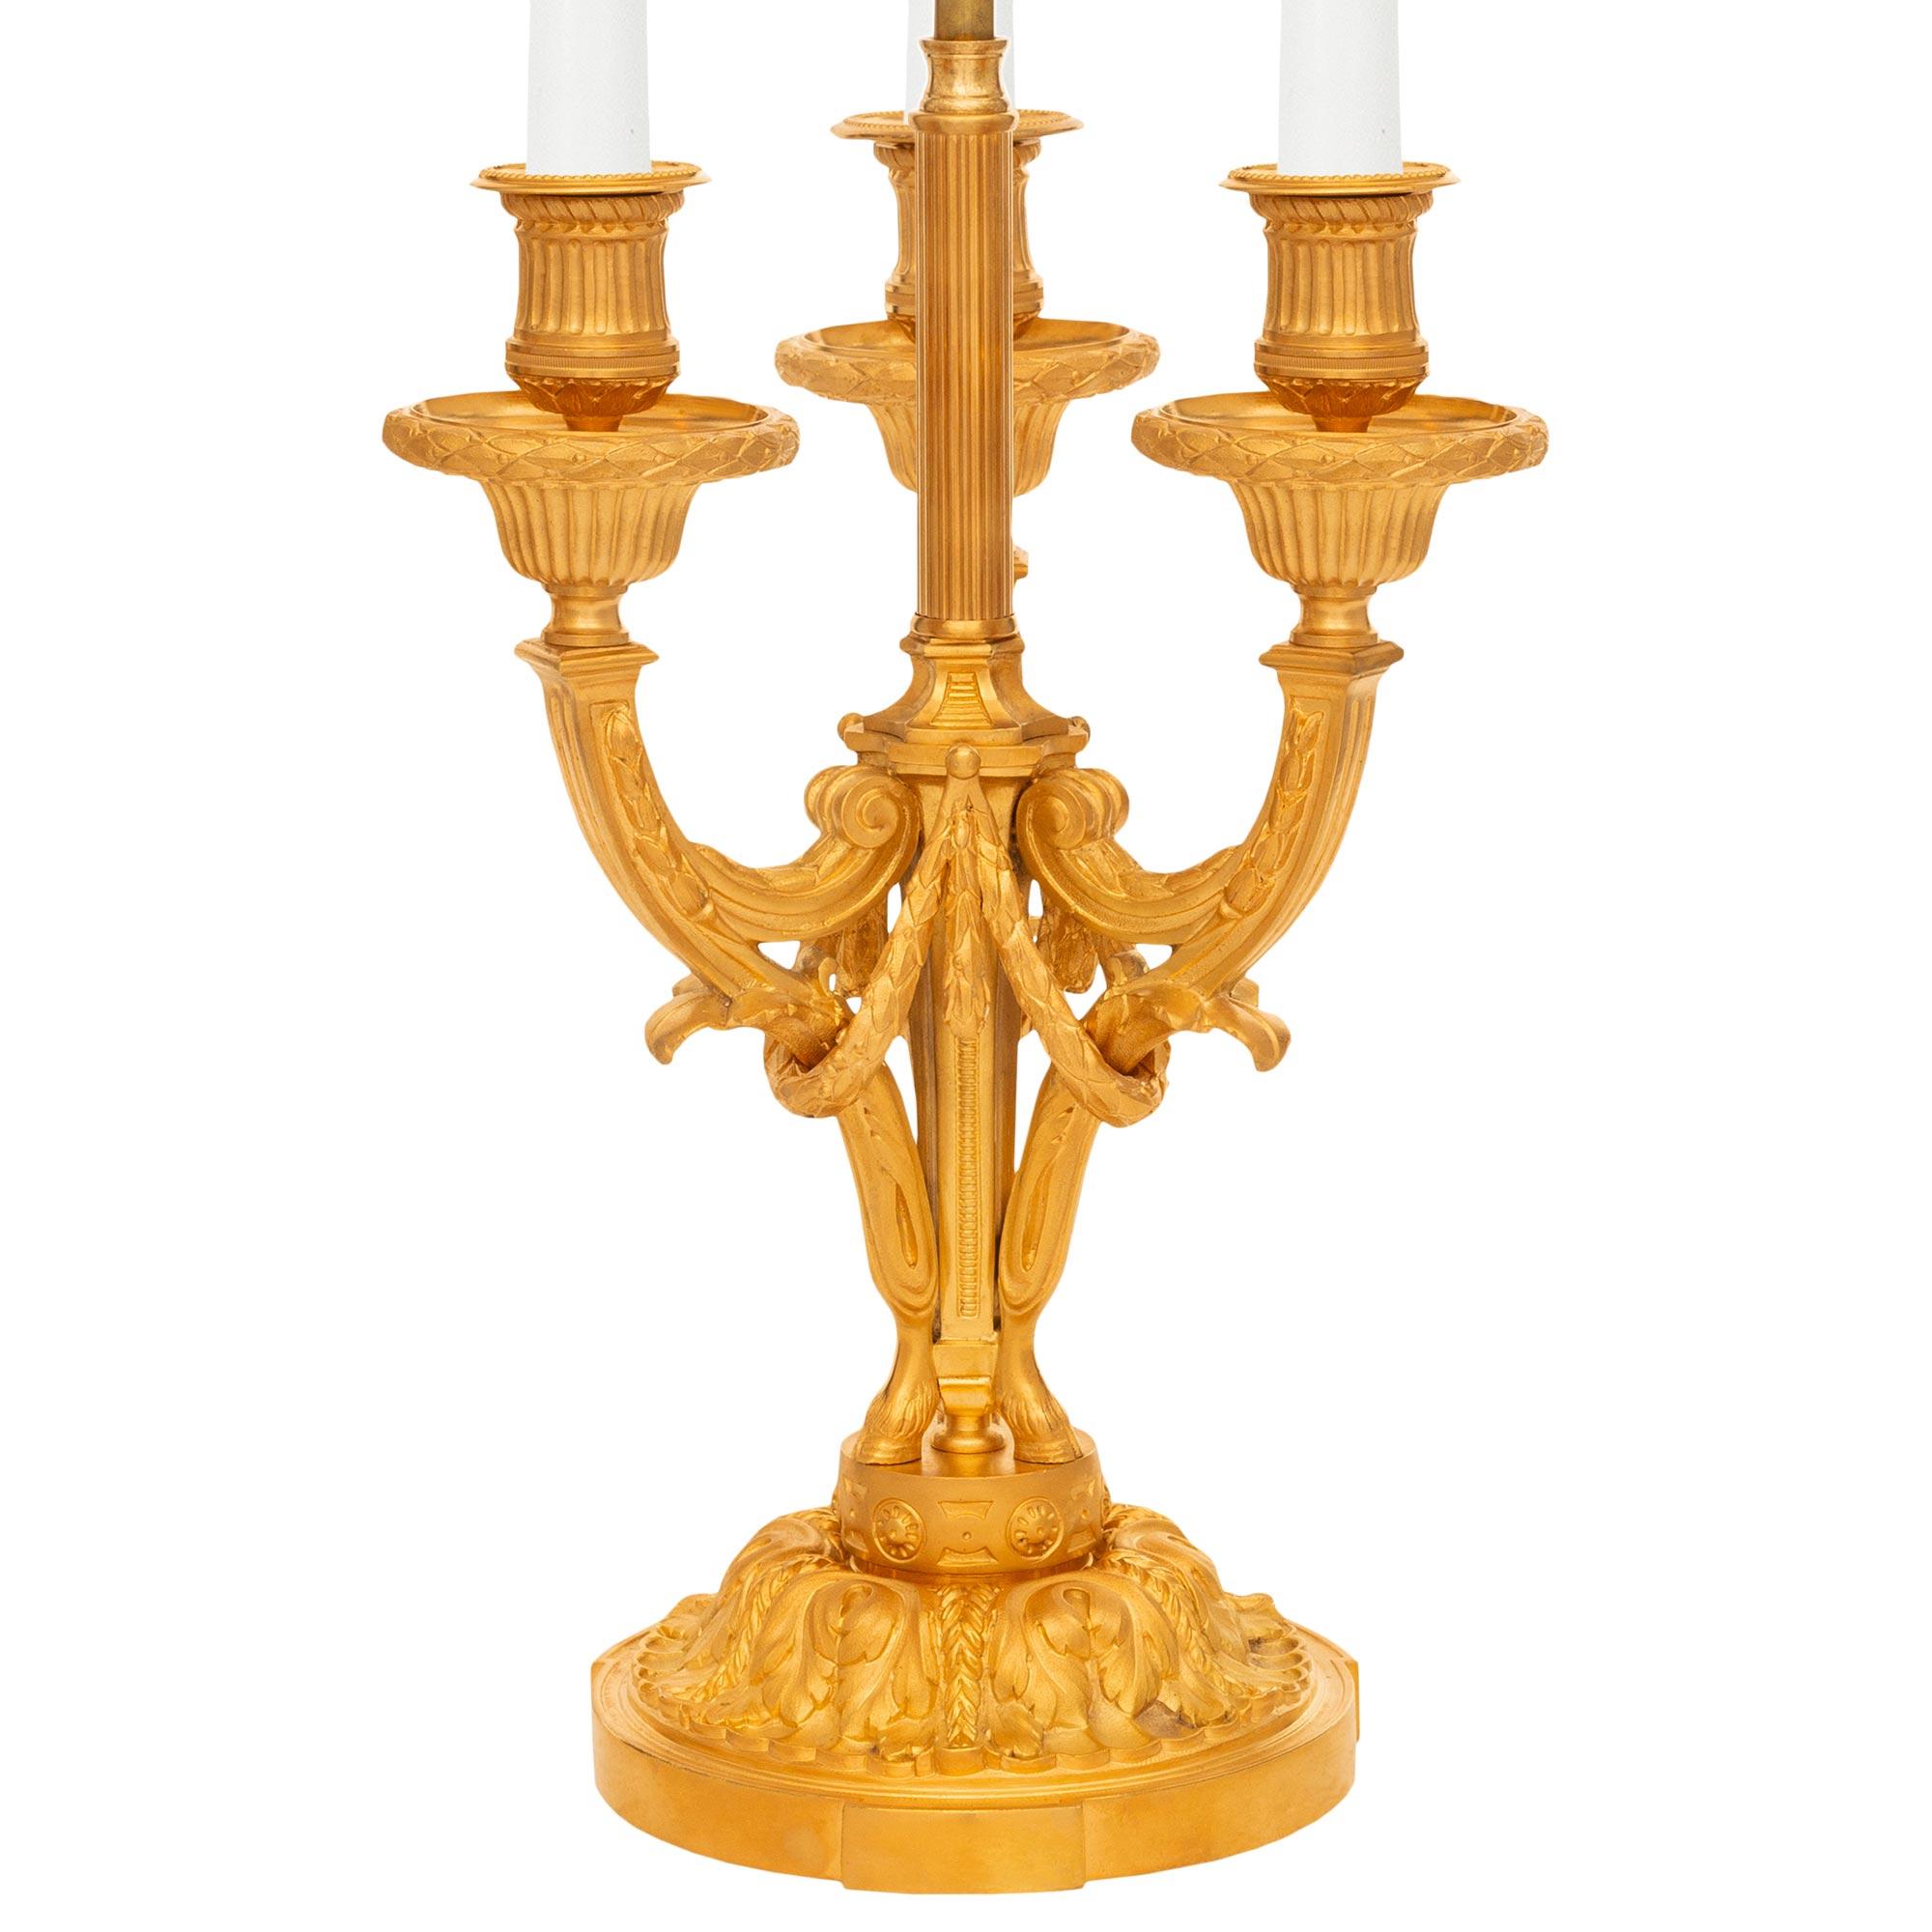 A very attractive pair of French 19th century Louis XVI st. Ormolu Bouillotte candelabra lamps. Each lamp is raised on a circular Ormolu base with finely chased acanthus leaves below a circular pedestal decorated on all sides by rosettes. The three